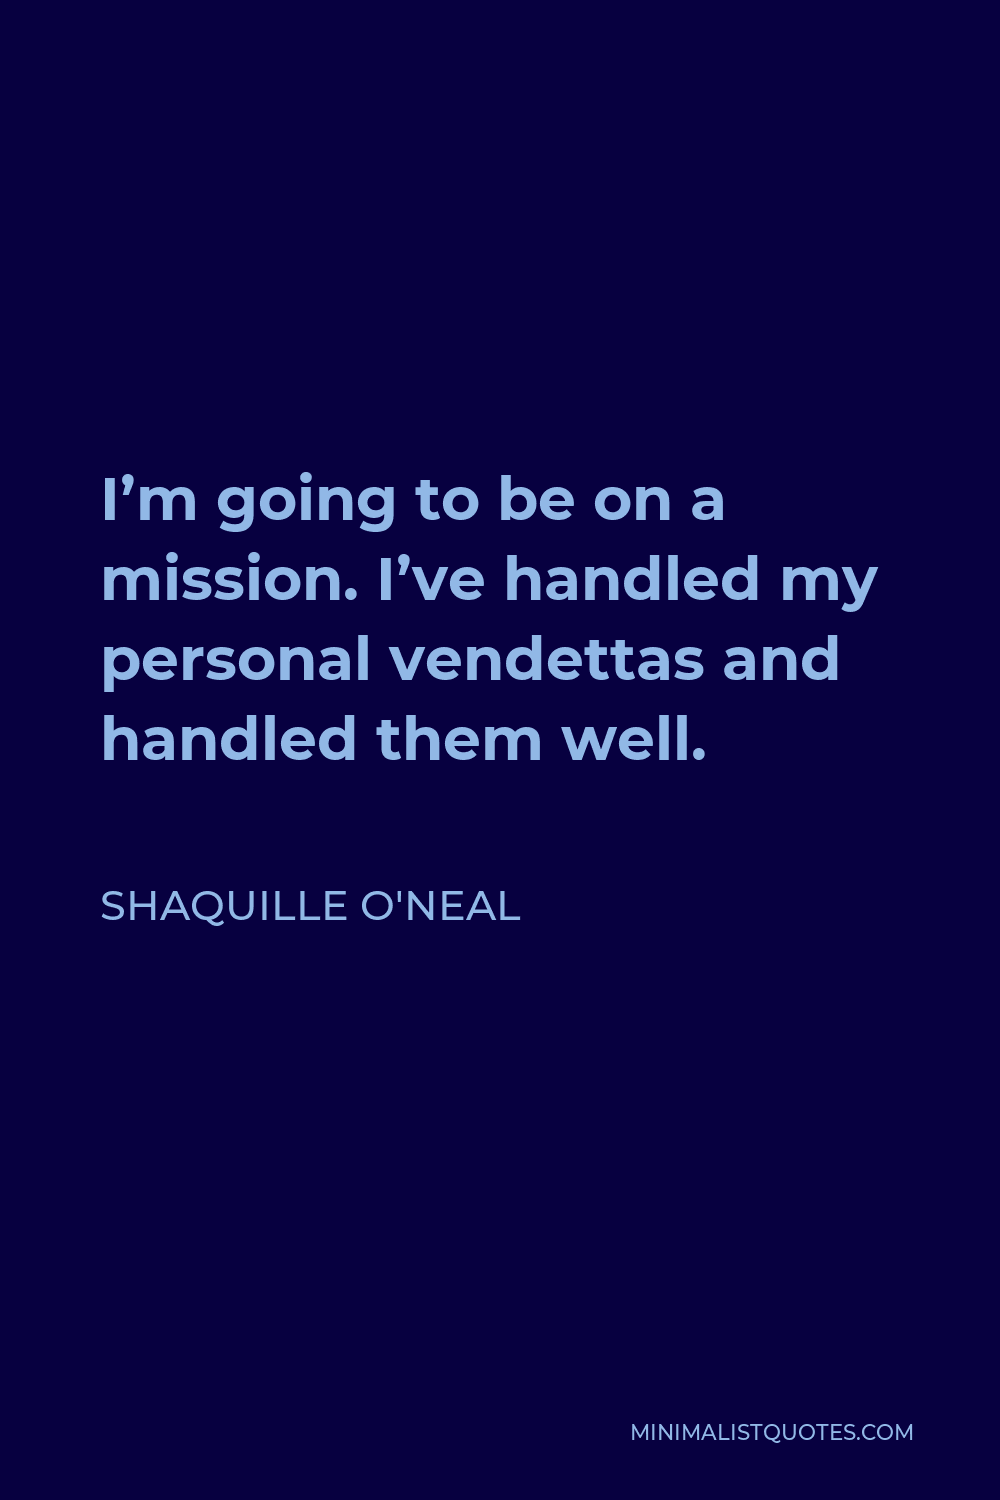 Shaquille O'Neal Quote - I’m going to be on a mission. I’ve handled my personal vendettas and handled them well.